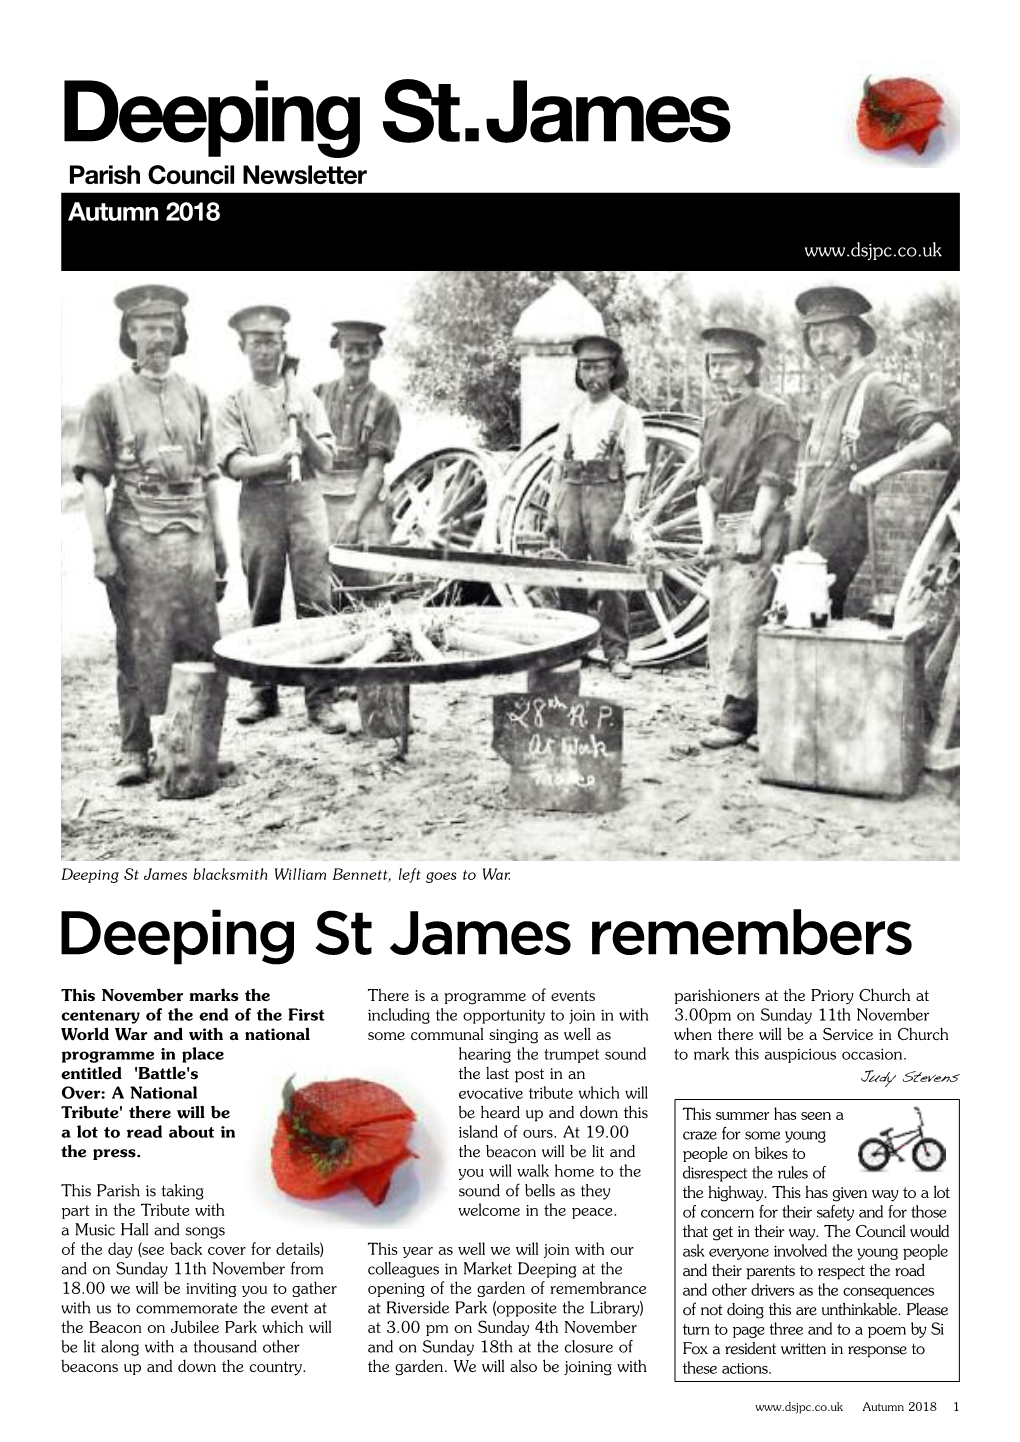 Deeping St James Remembers